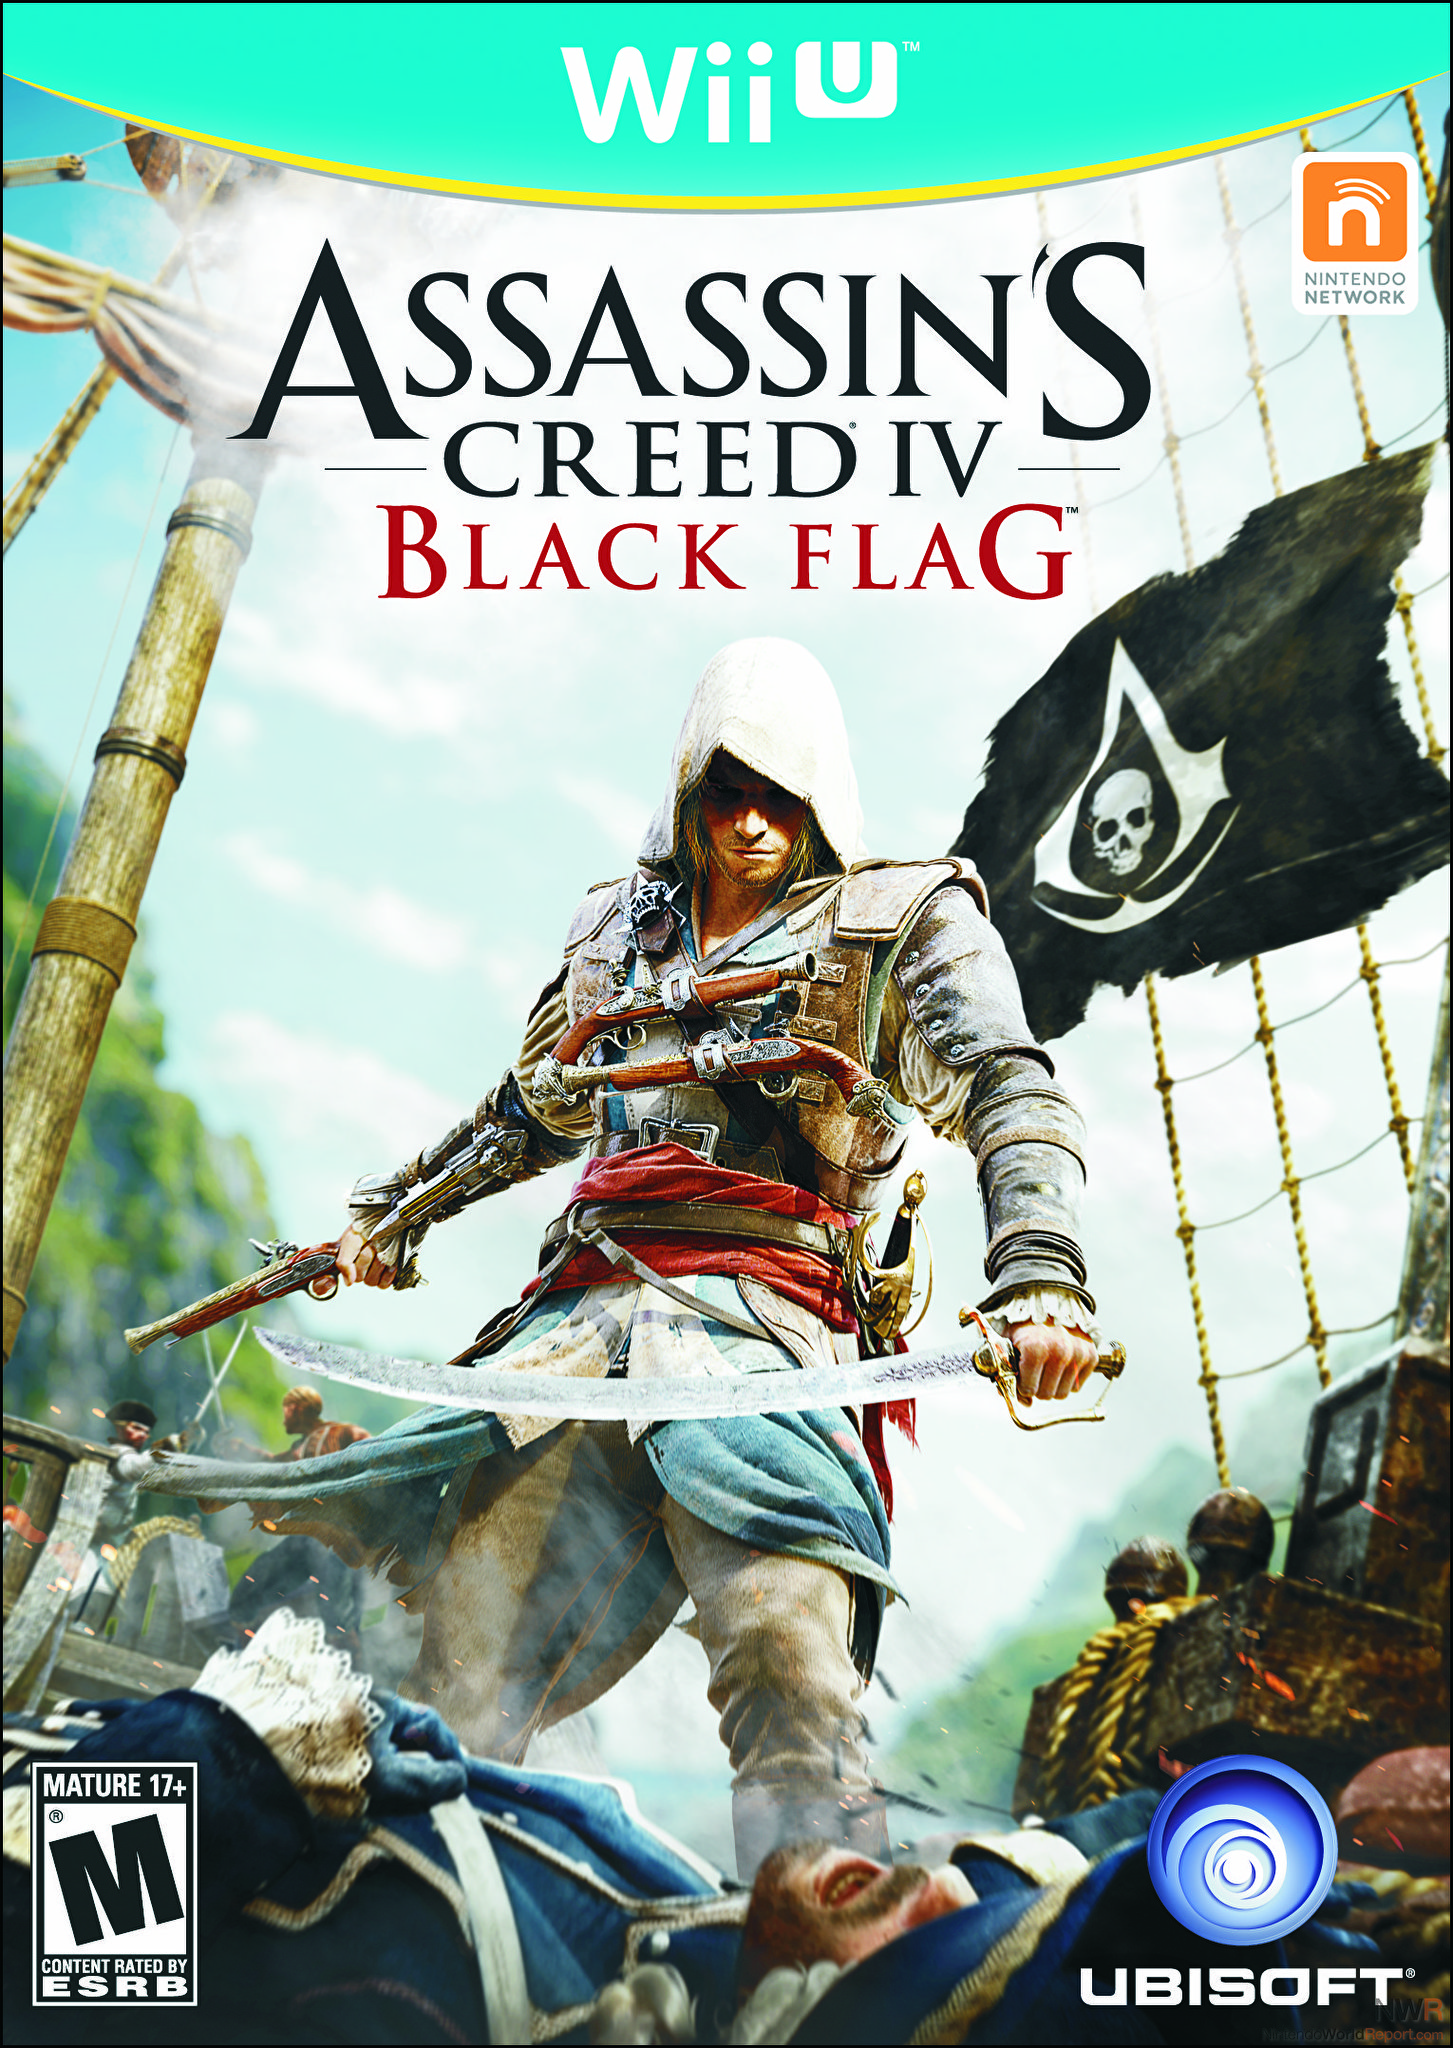 Assassin's Creed IV: Black Flag Review - Review - Nintendo World Report